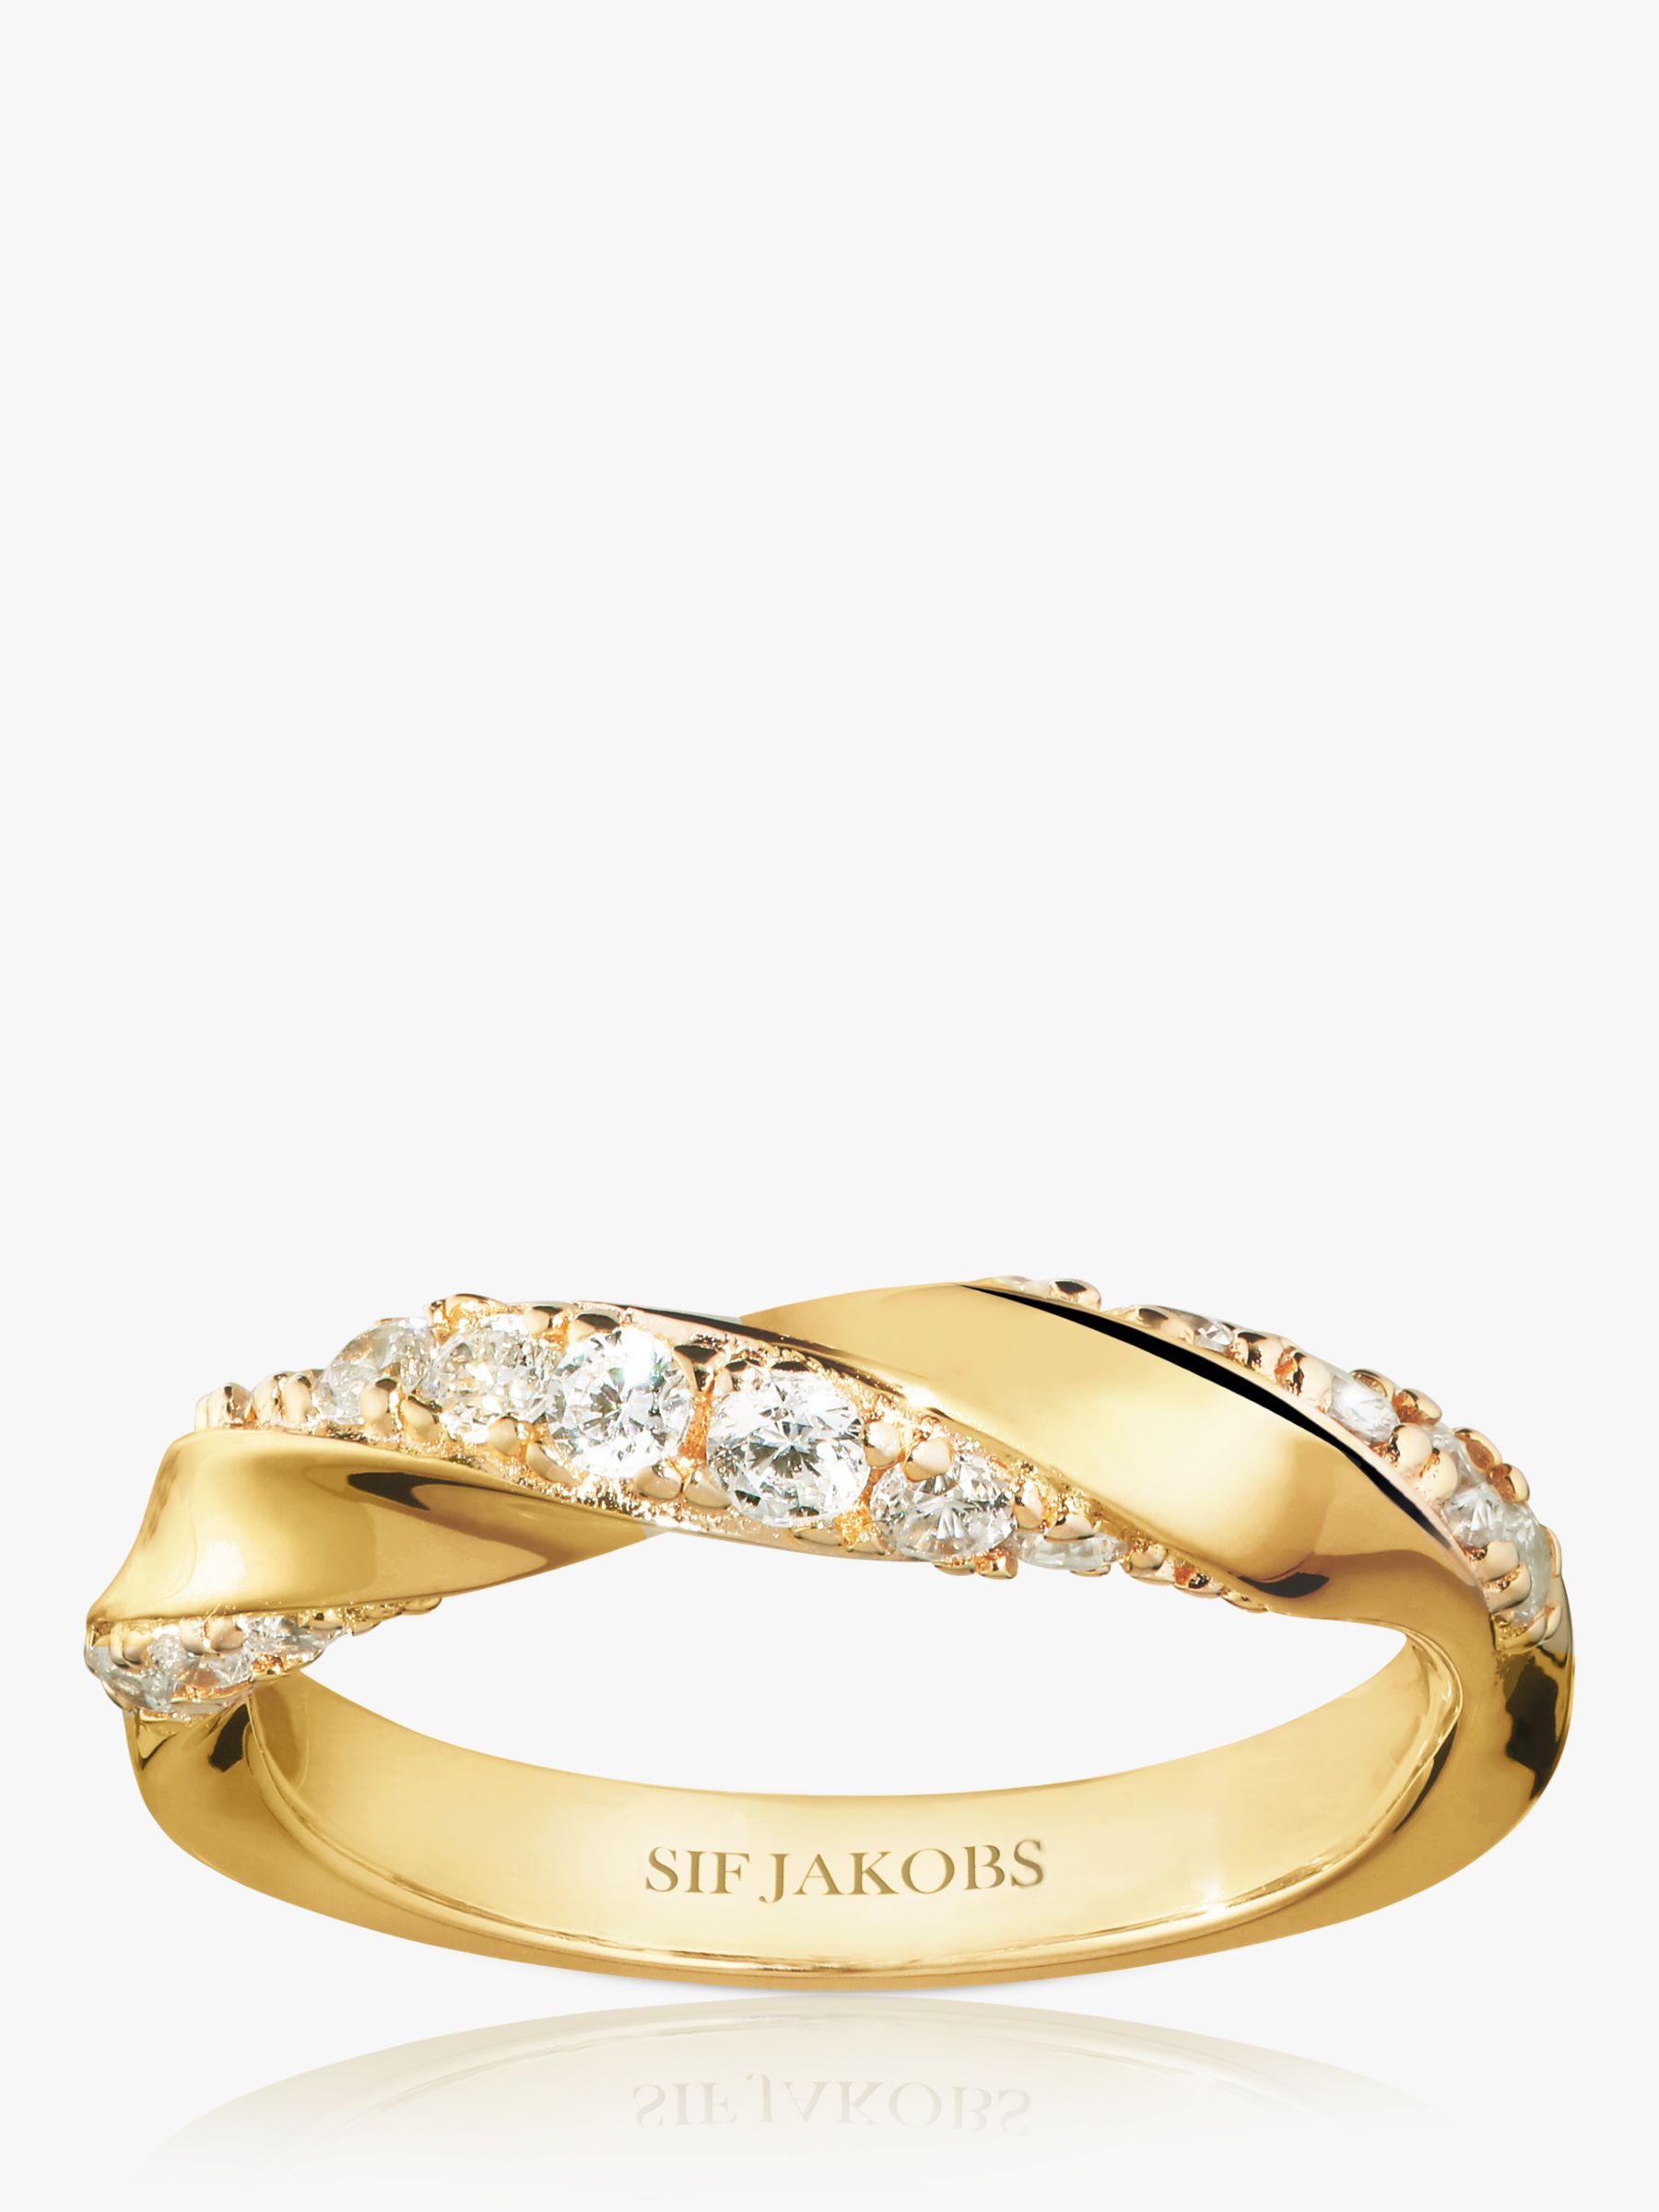  Marc Jacobs Logo Metal Ring Gold 7: Clothing, Shoes & Jewelry